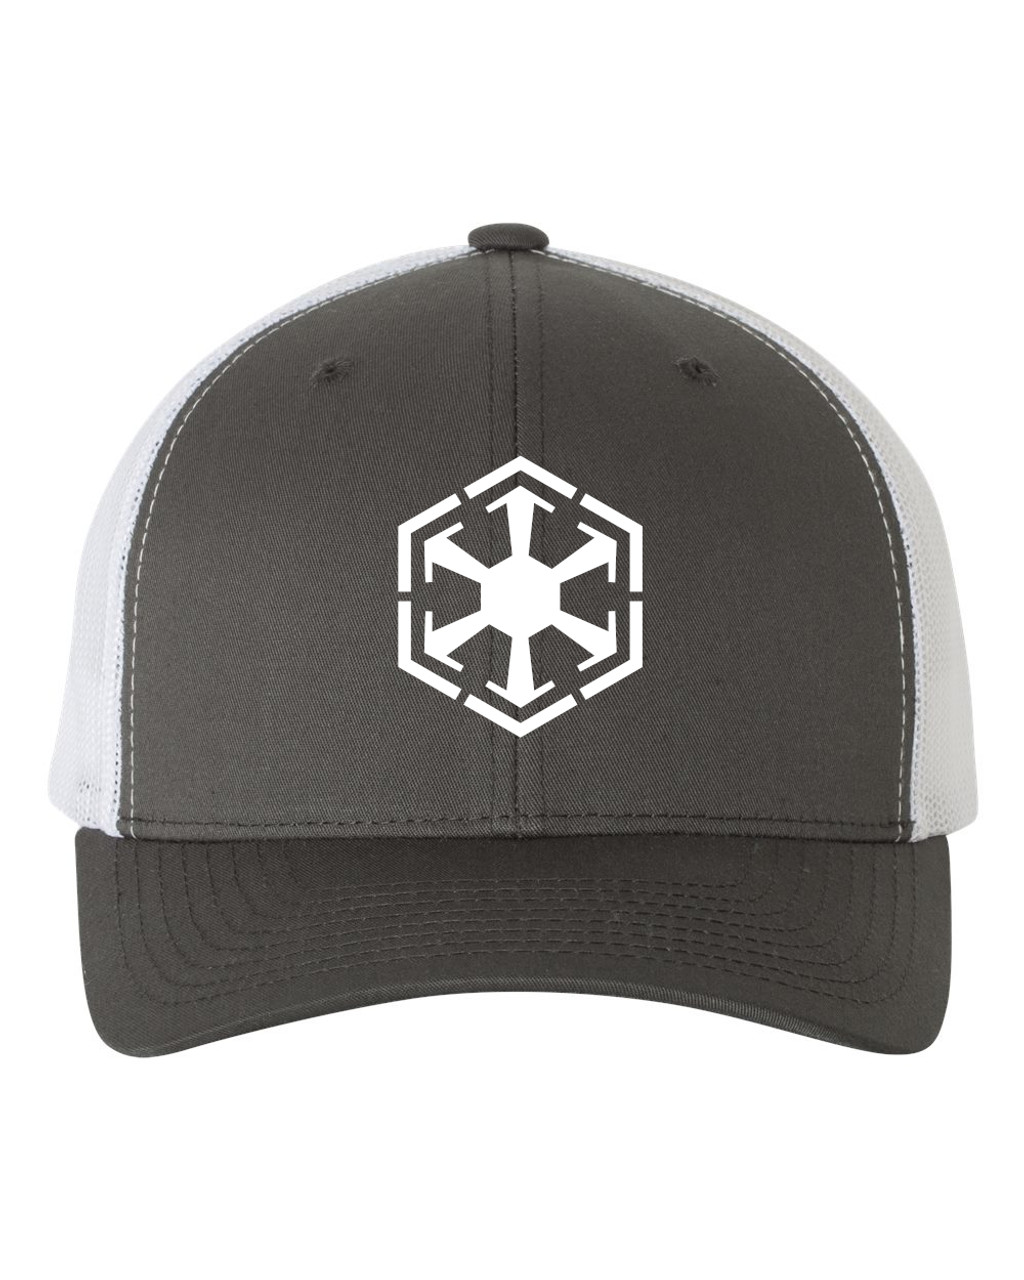 Star Force Sith Lord Dark Side Heat Pressed Grey on White Curved Bill Hat - Adult Mesh Trucker Snap Back Cap